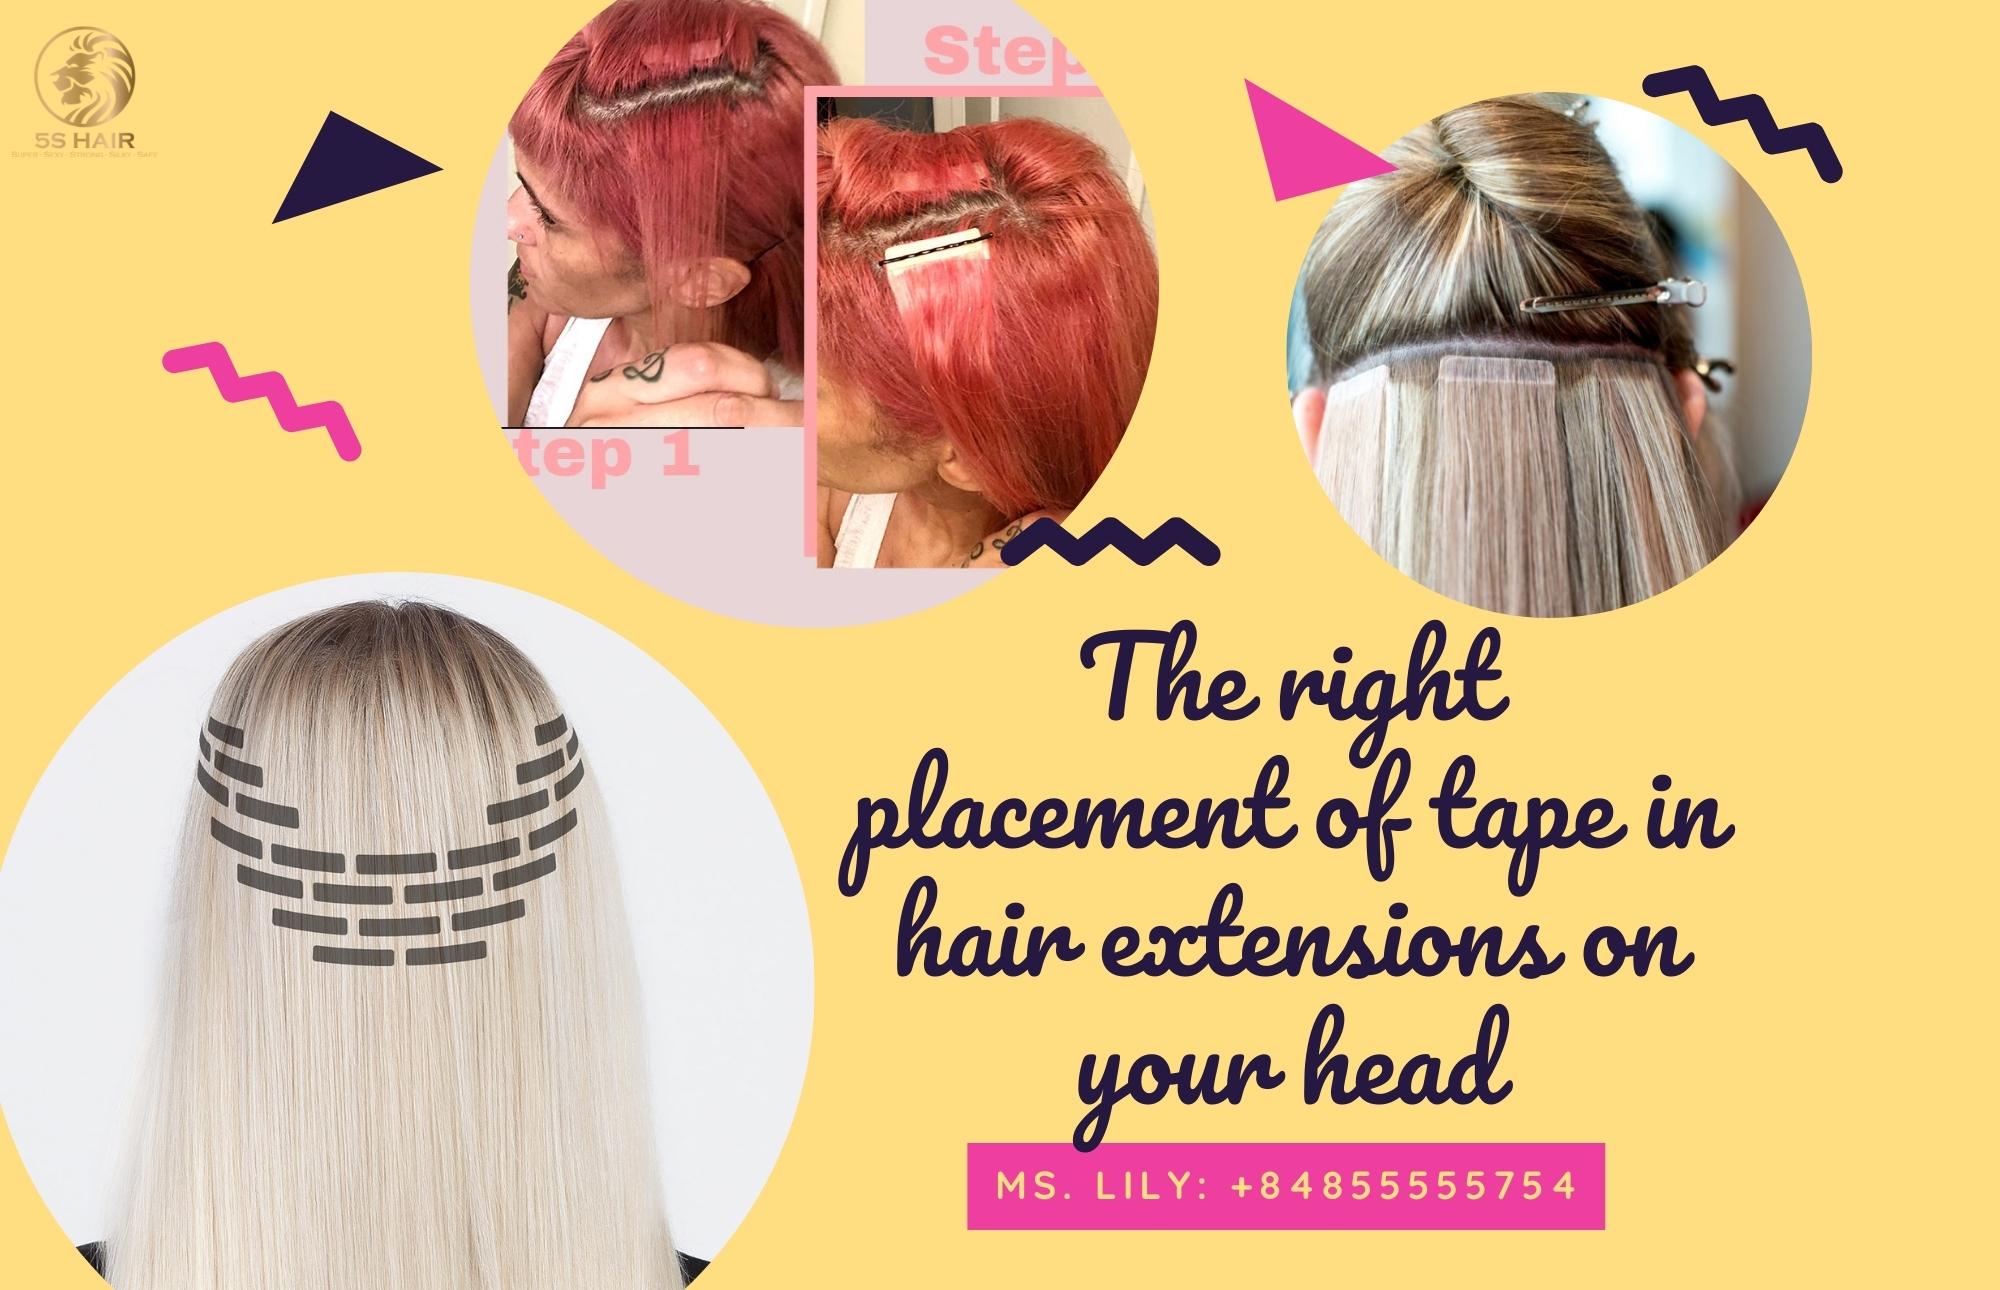 The right placement of tape in hair extensions on your head